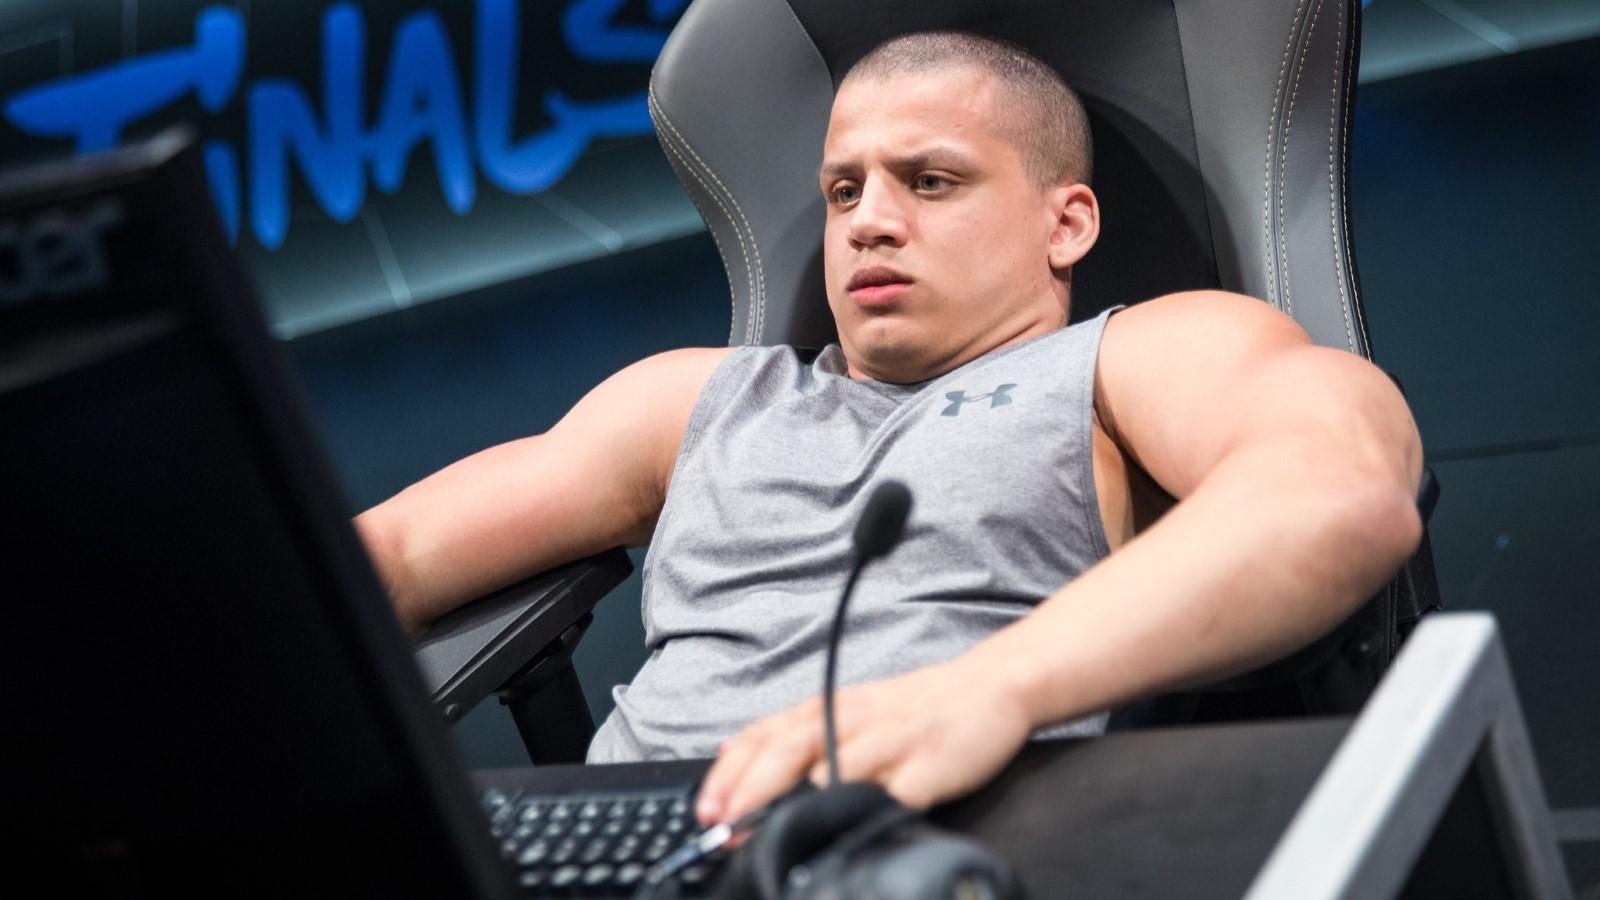 Tyler1 speaks out against LCS walkout